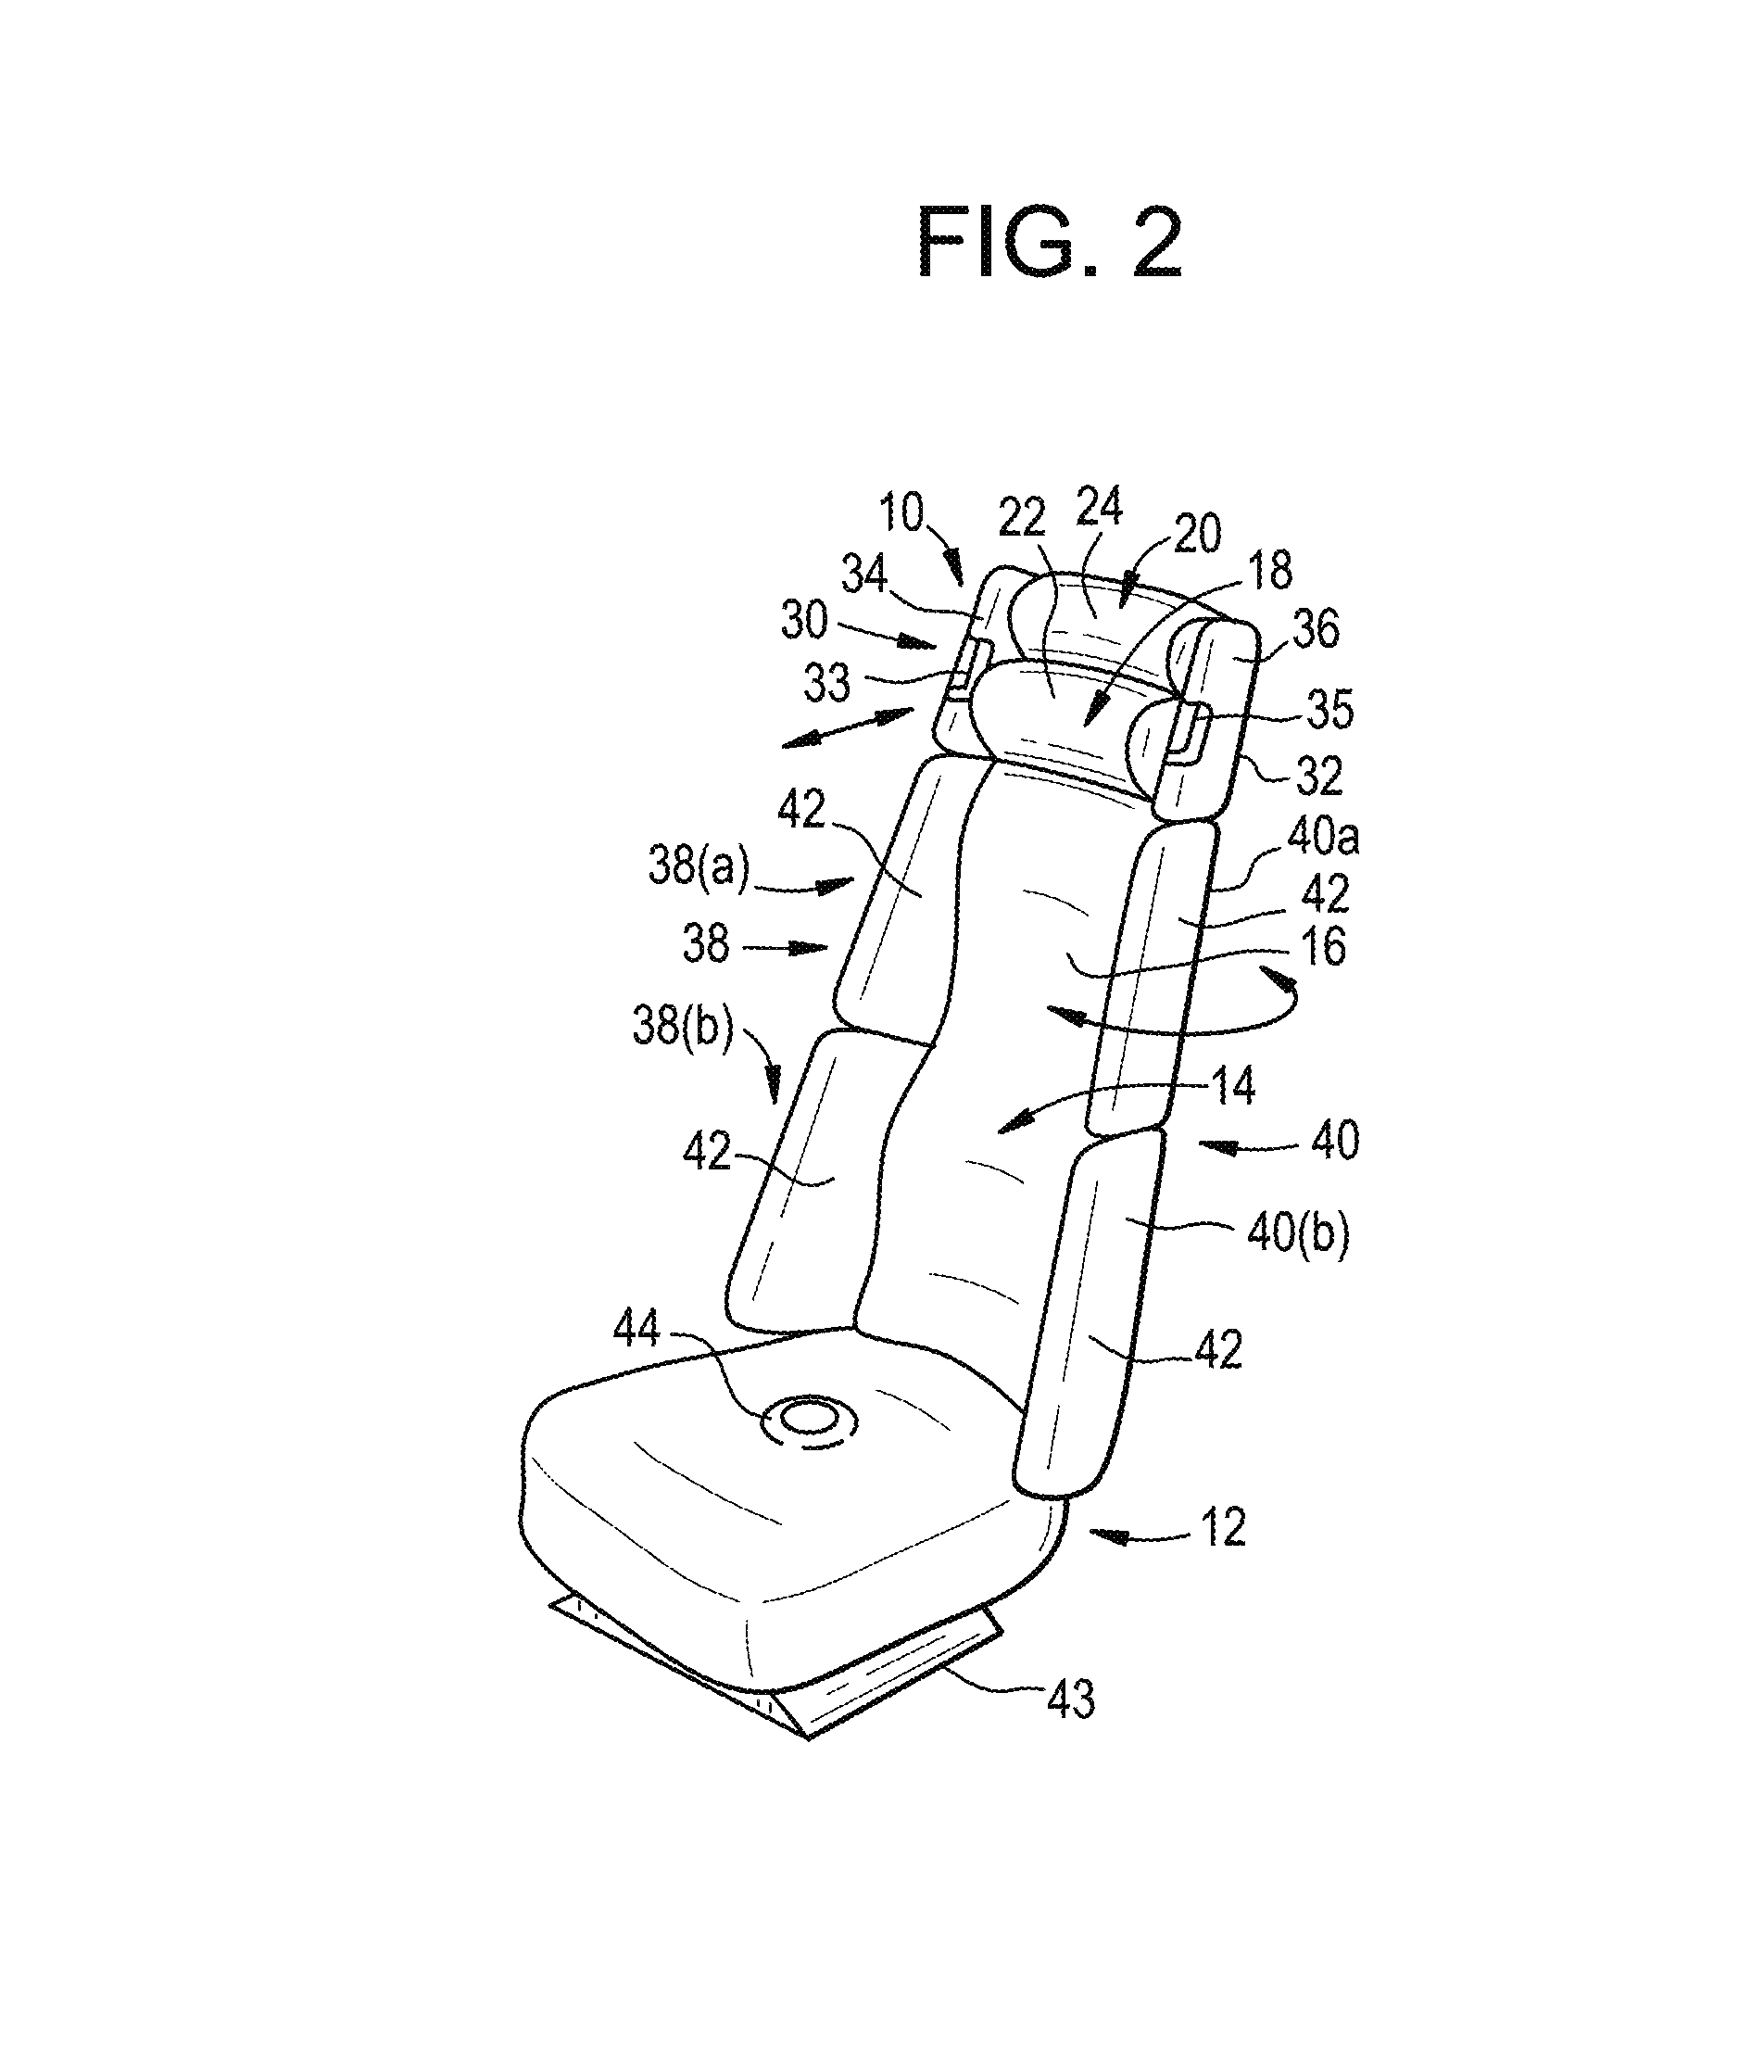 Seat for reducing the risk of spinal injuries